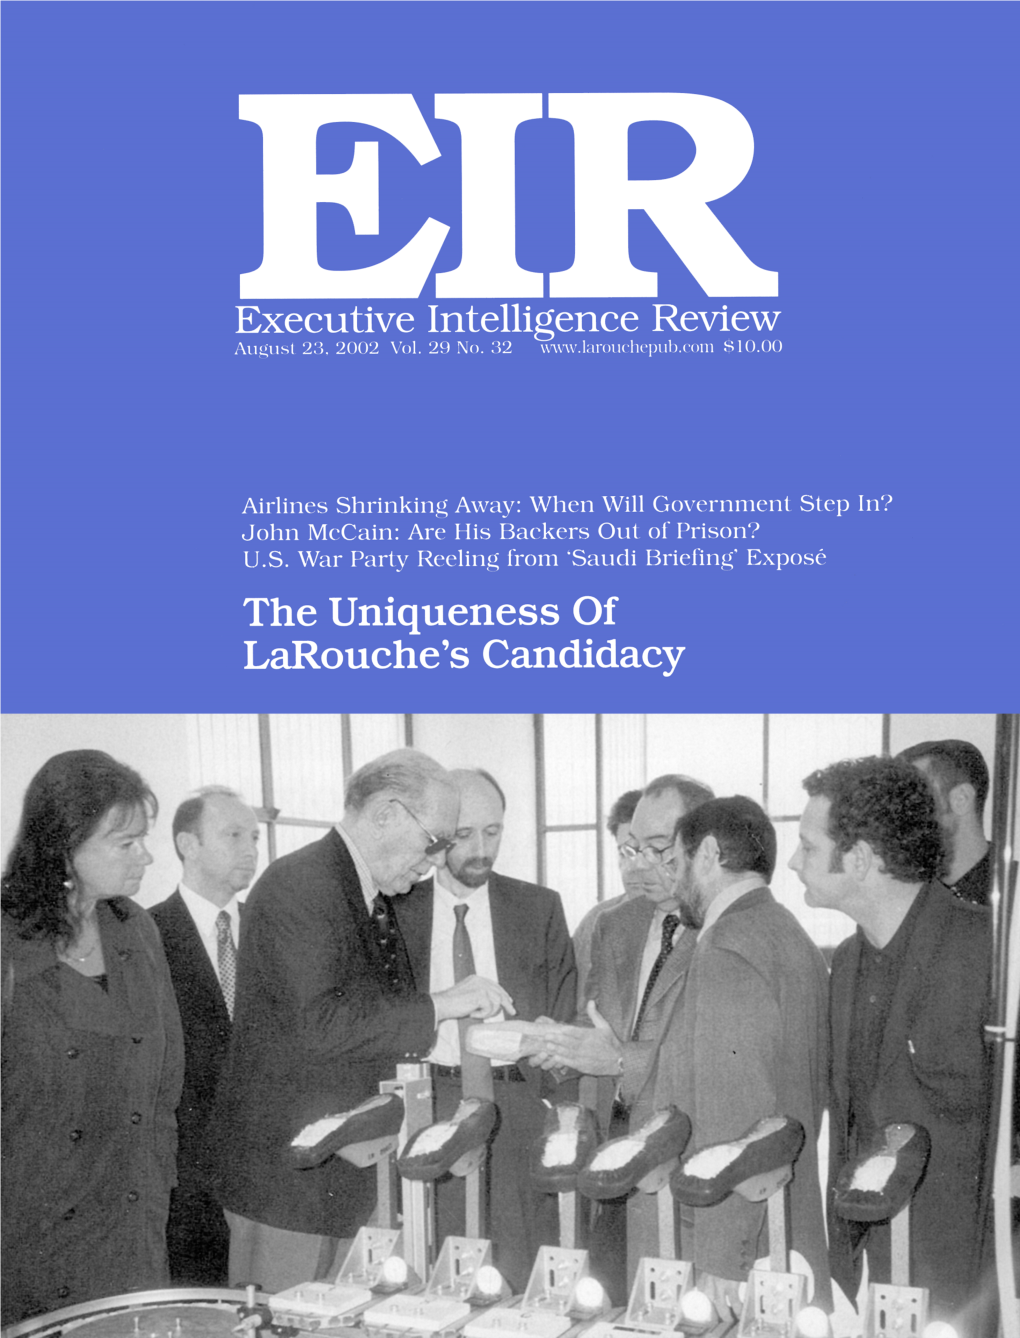 Executive Intelligence Review, Volume 29, Number 32, August 23